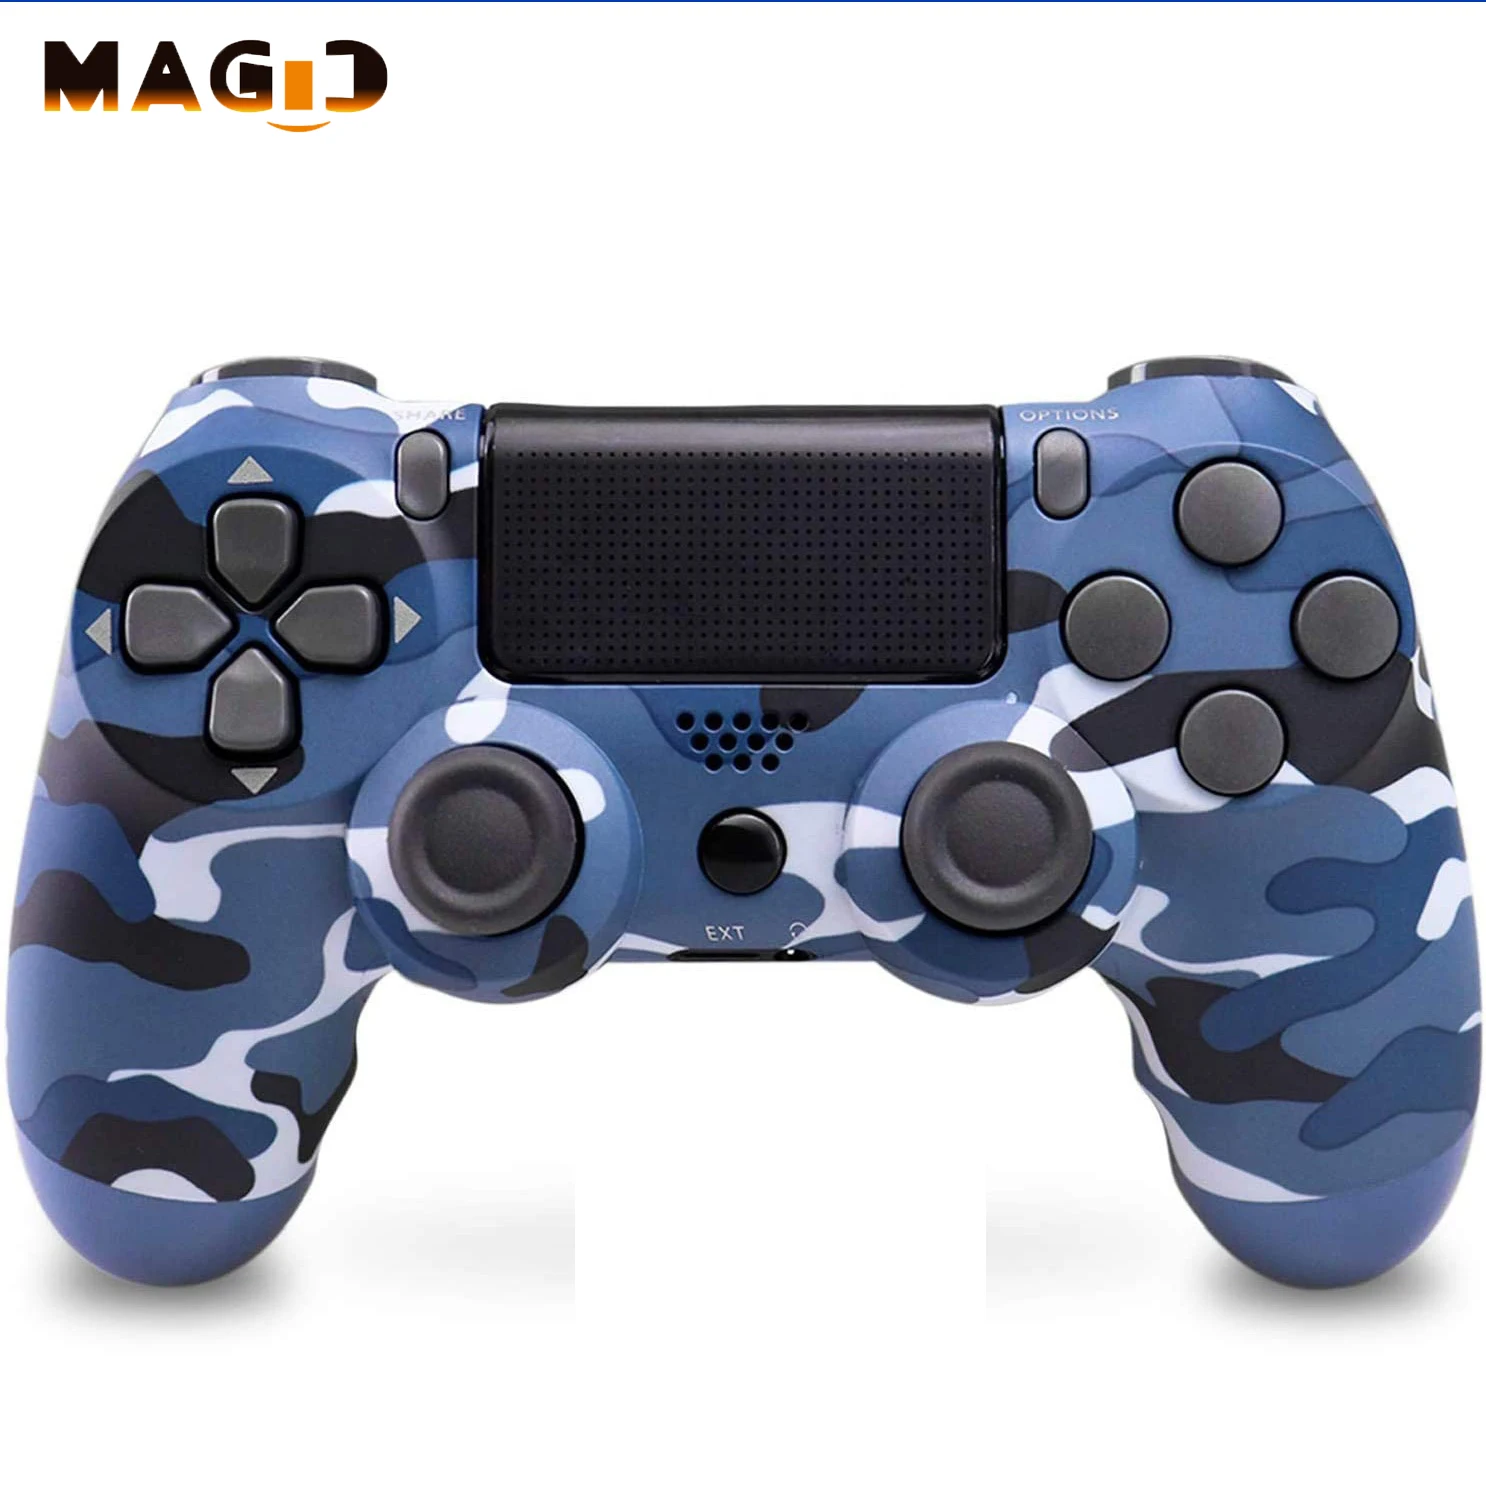 

Factory Price Nacon Consola Children Play Games Control Play Station 4 Accessories Game Controller Wireless For Sony Control, 23 colors available in stock